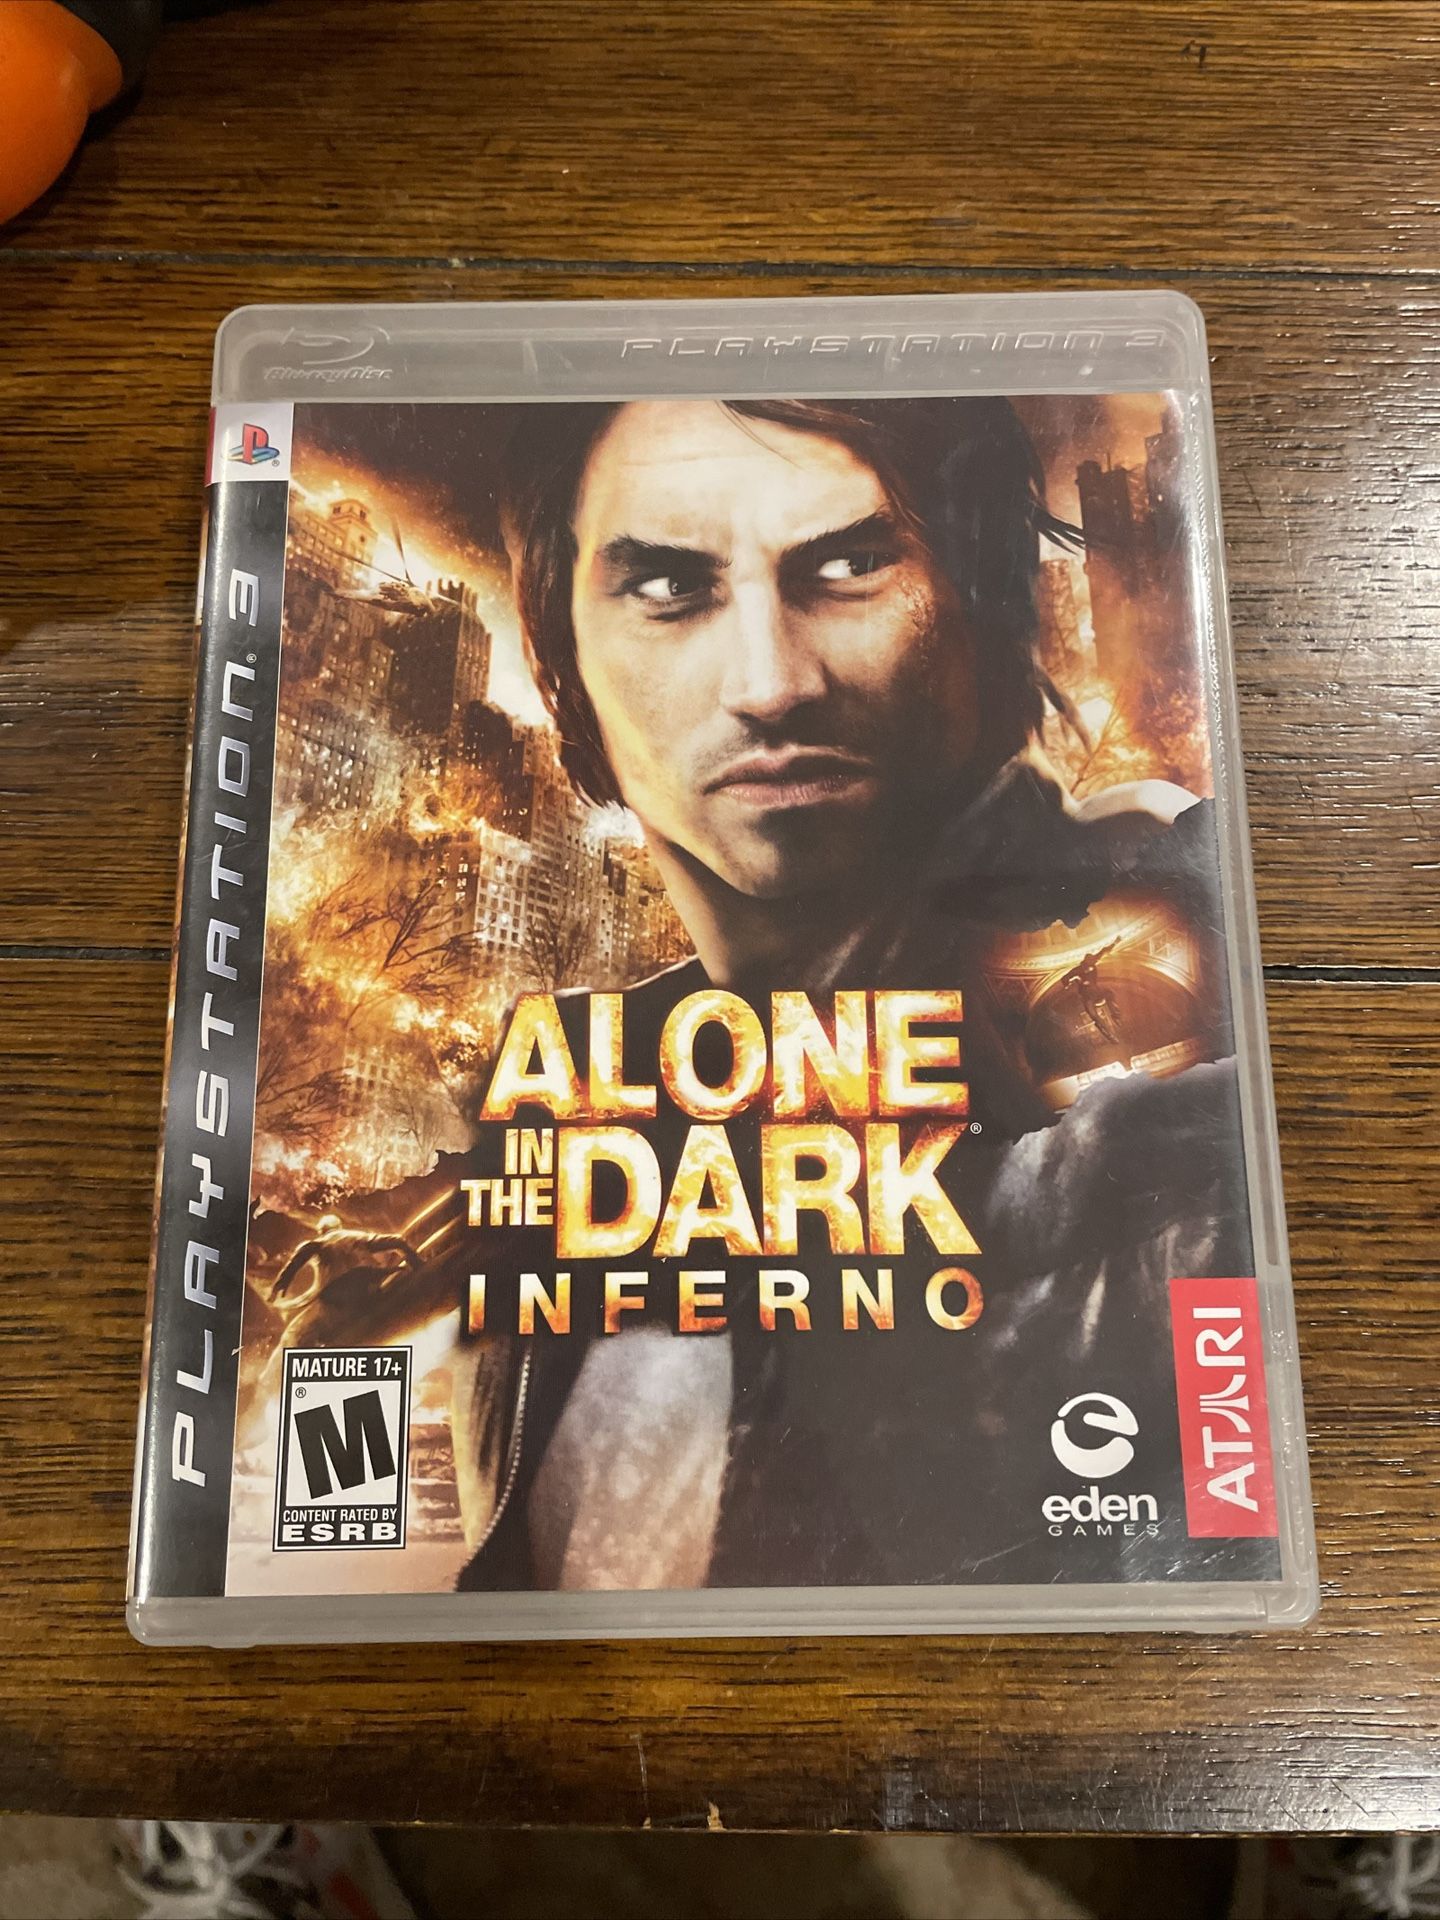 Alone in the Dark Inferno Playstation 3 PS3 Video Game Complete